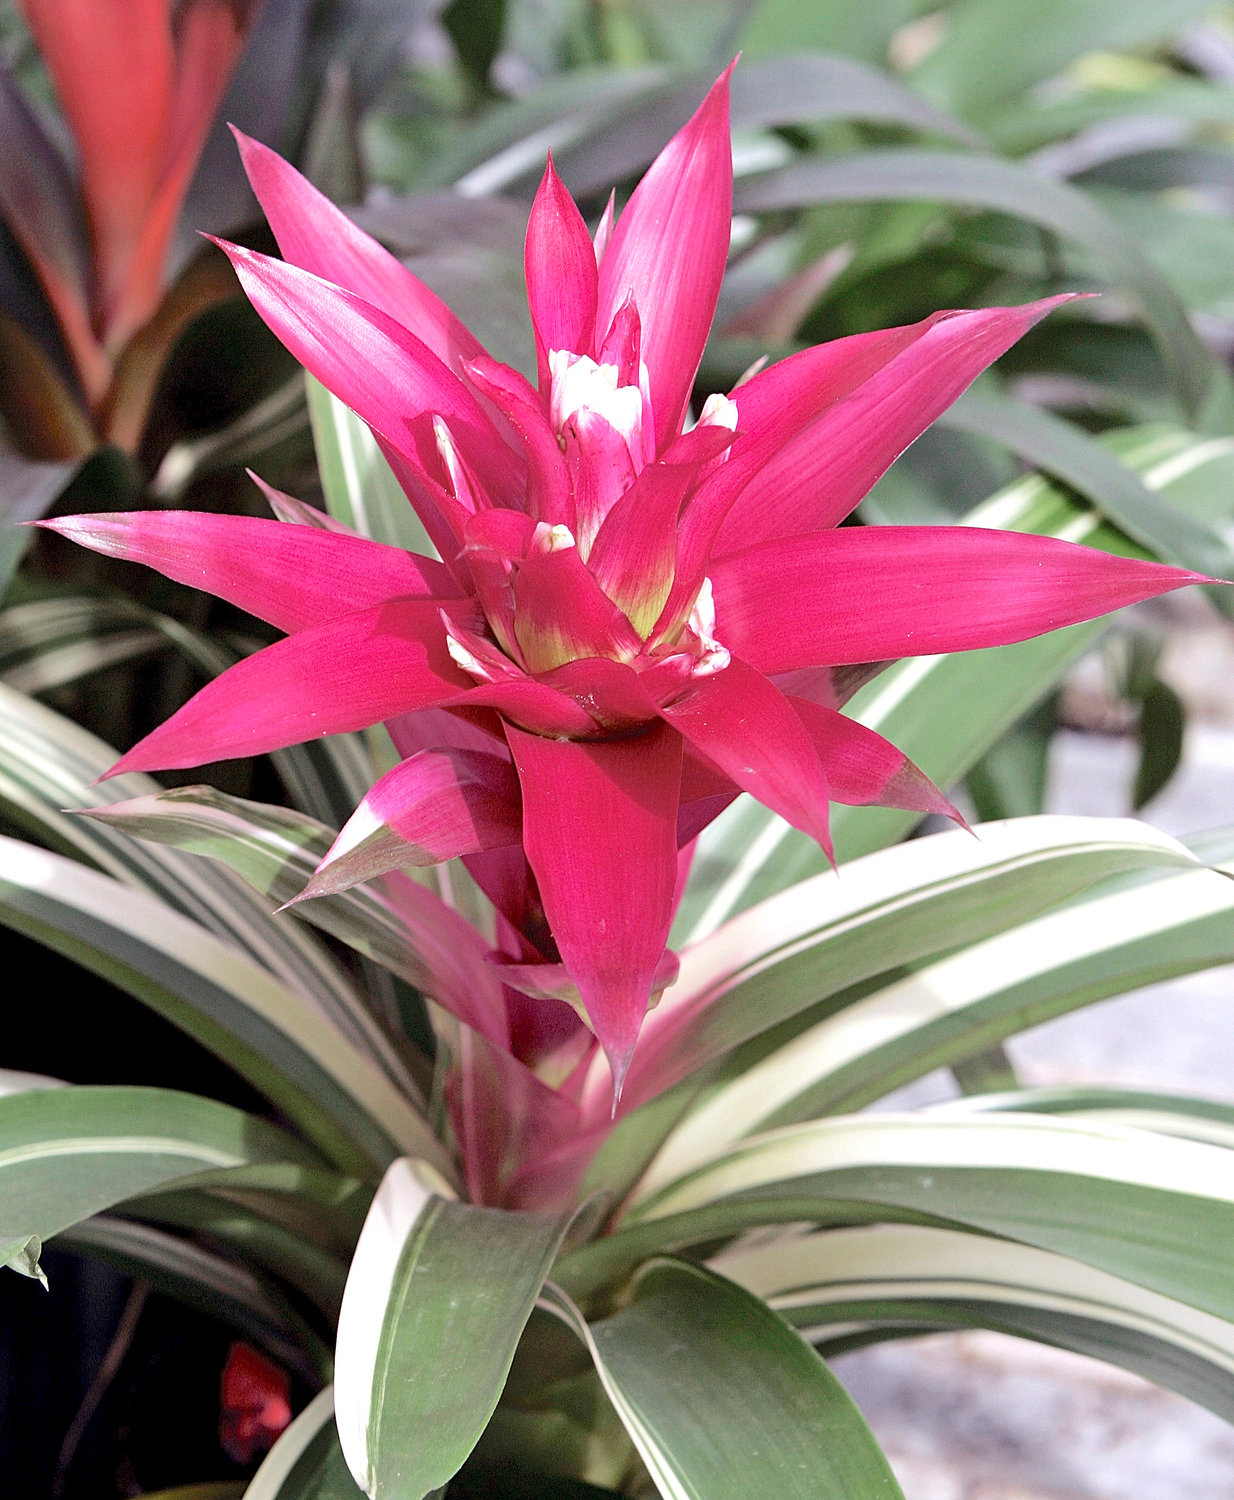 Bromeliad is an alternative plant for decoration during the holidays that isn't poisonous.